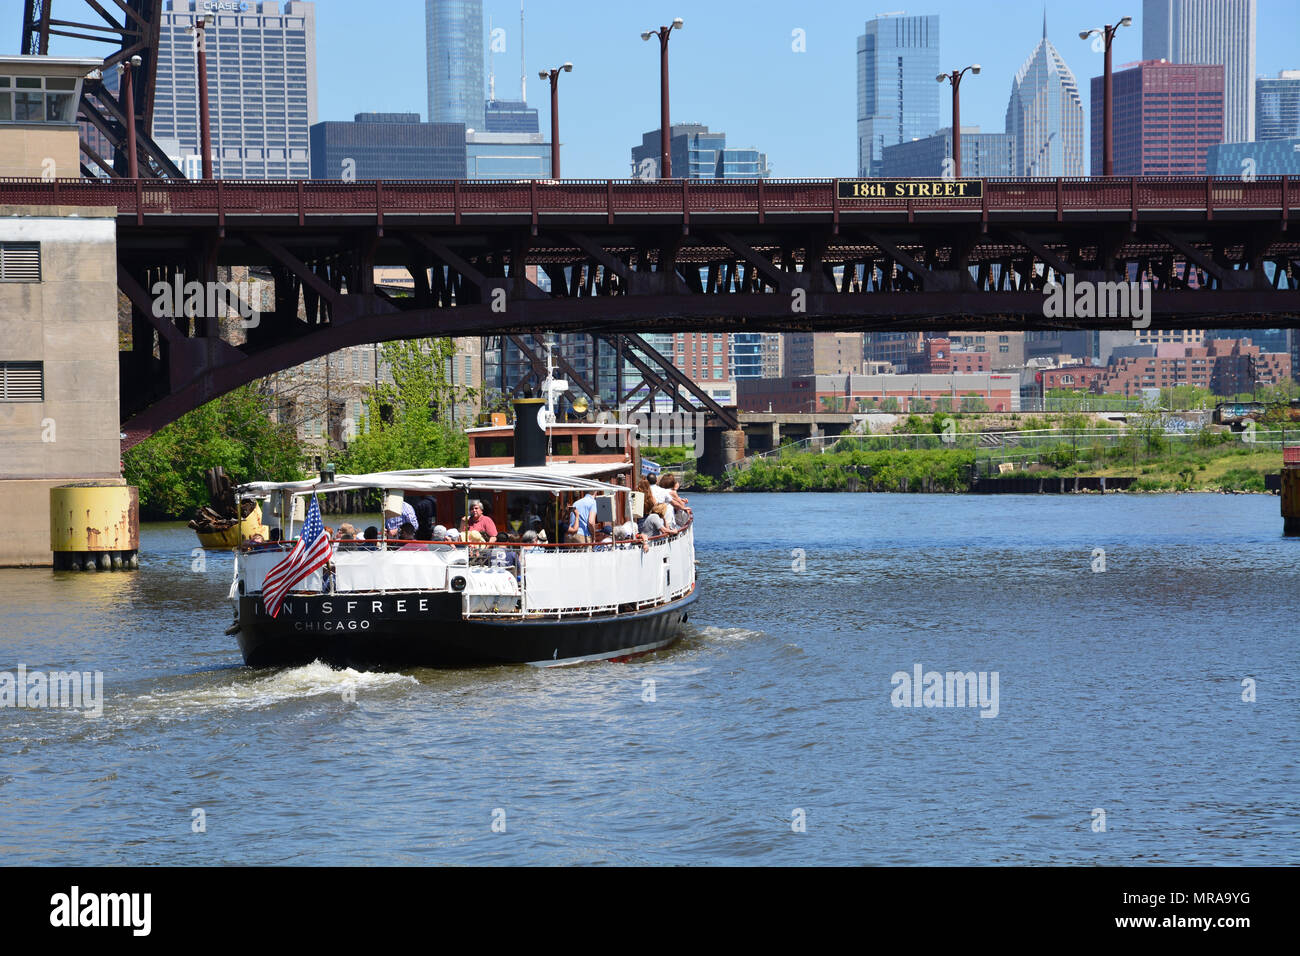 The river tour boat Innisfree carrying tourists on the Chicago River south of downtown. Stock Photo